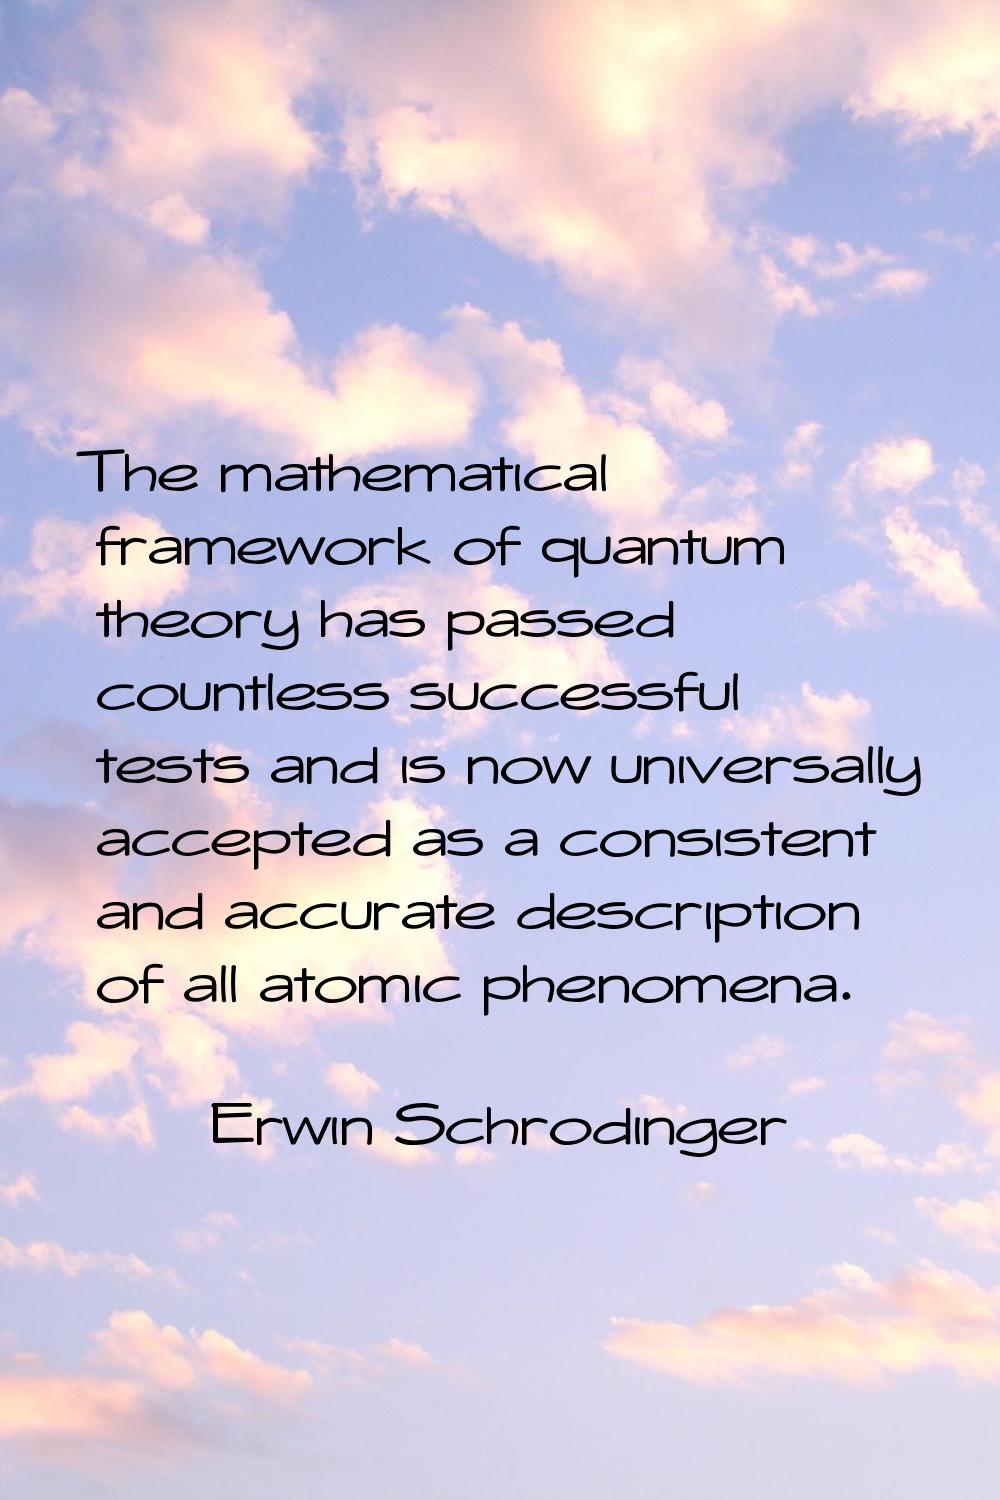 The mathematical framework of quantum theory has passed countless successful tests and is now unive